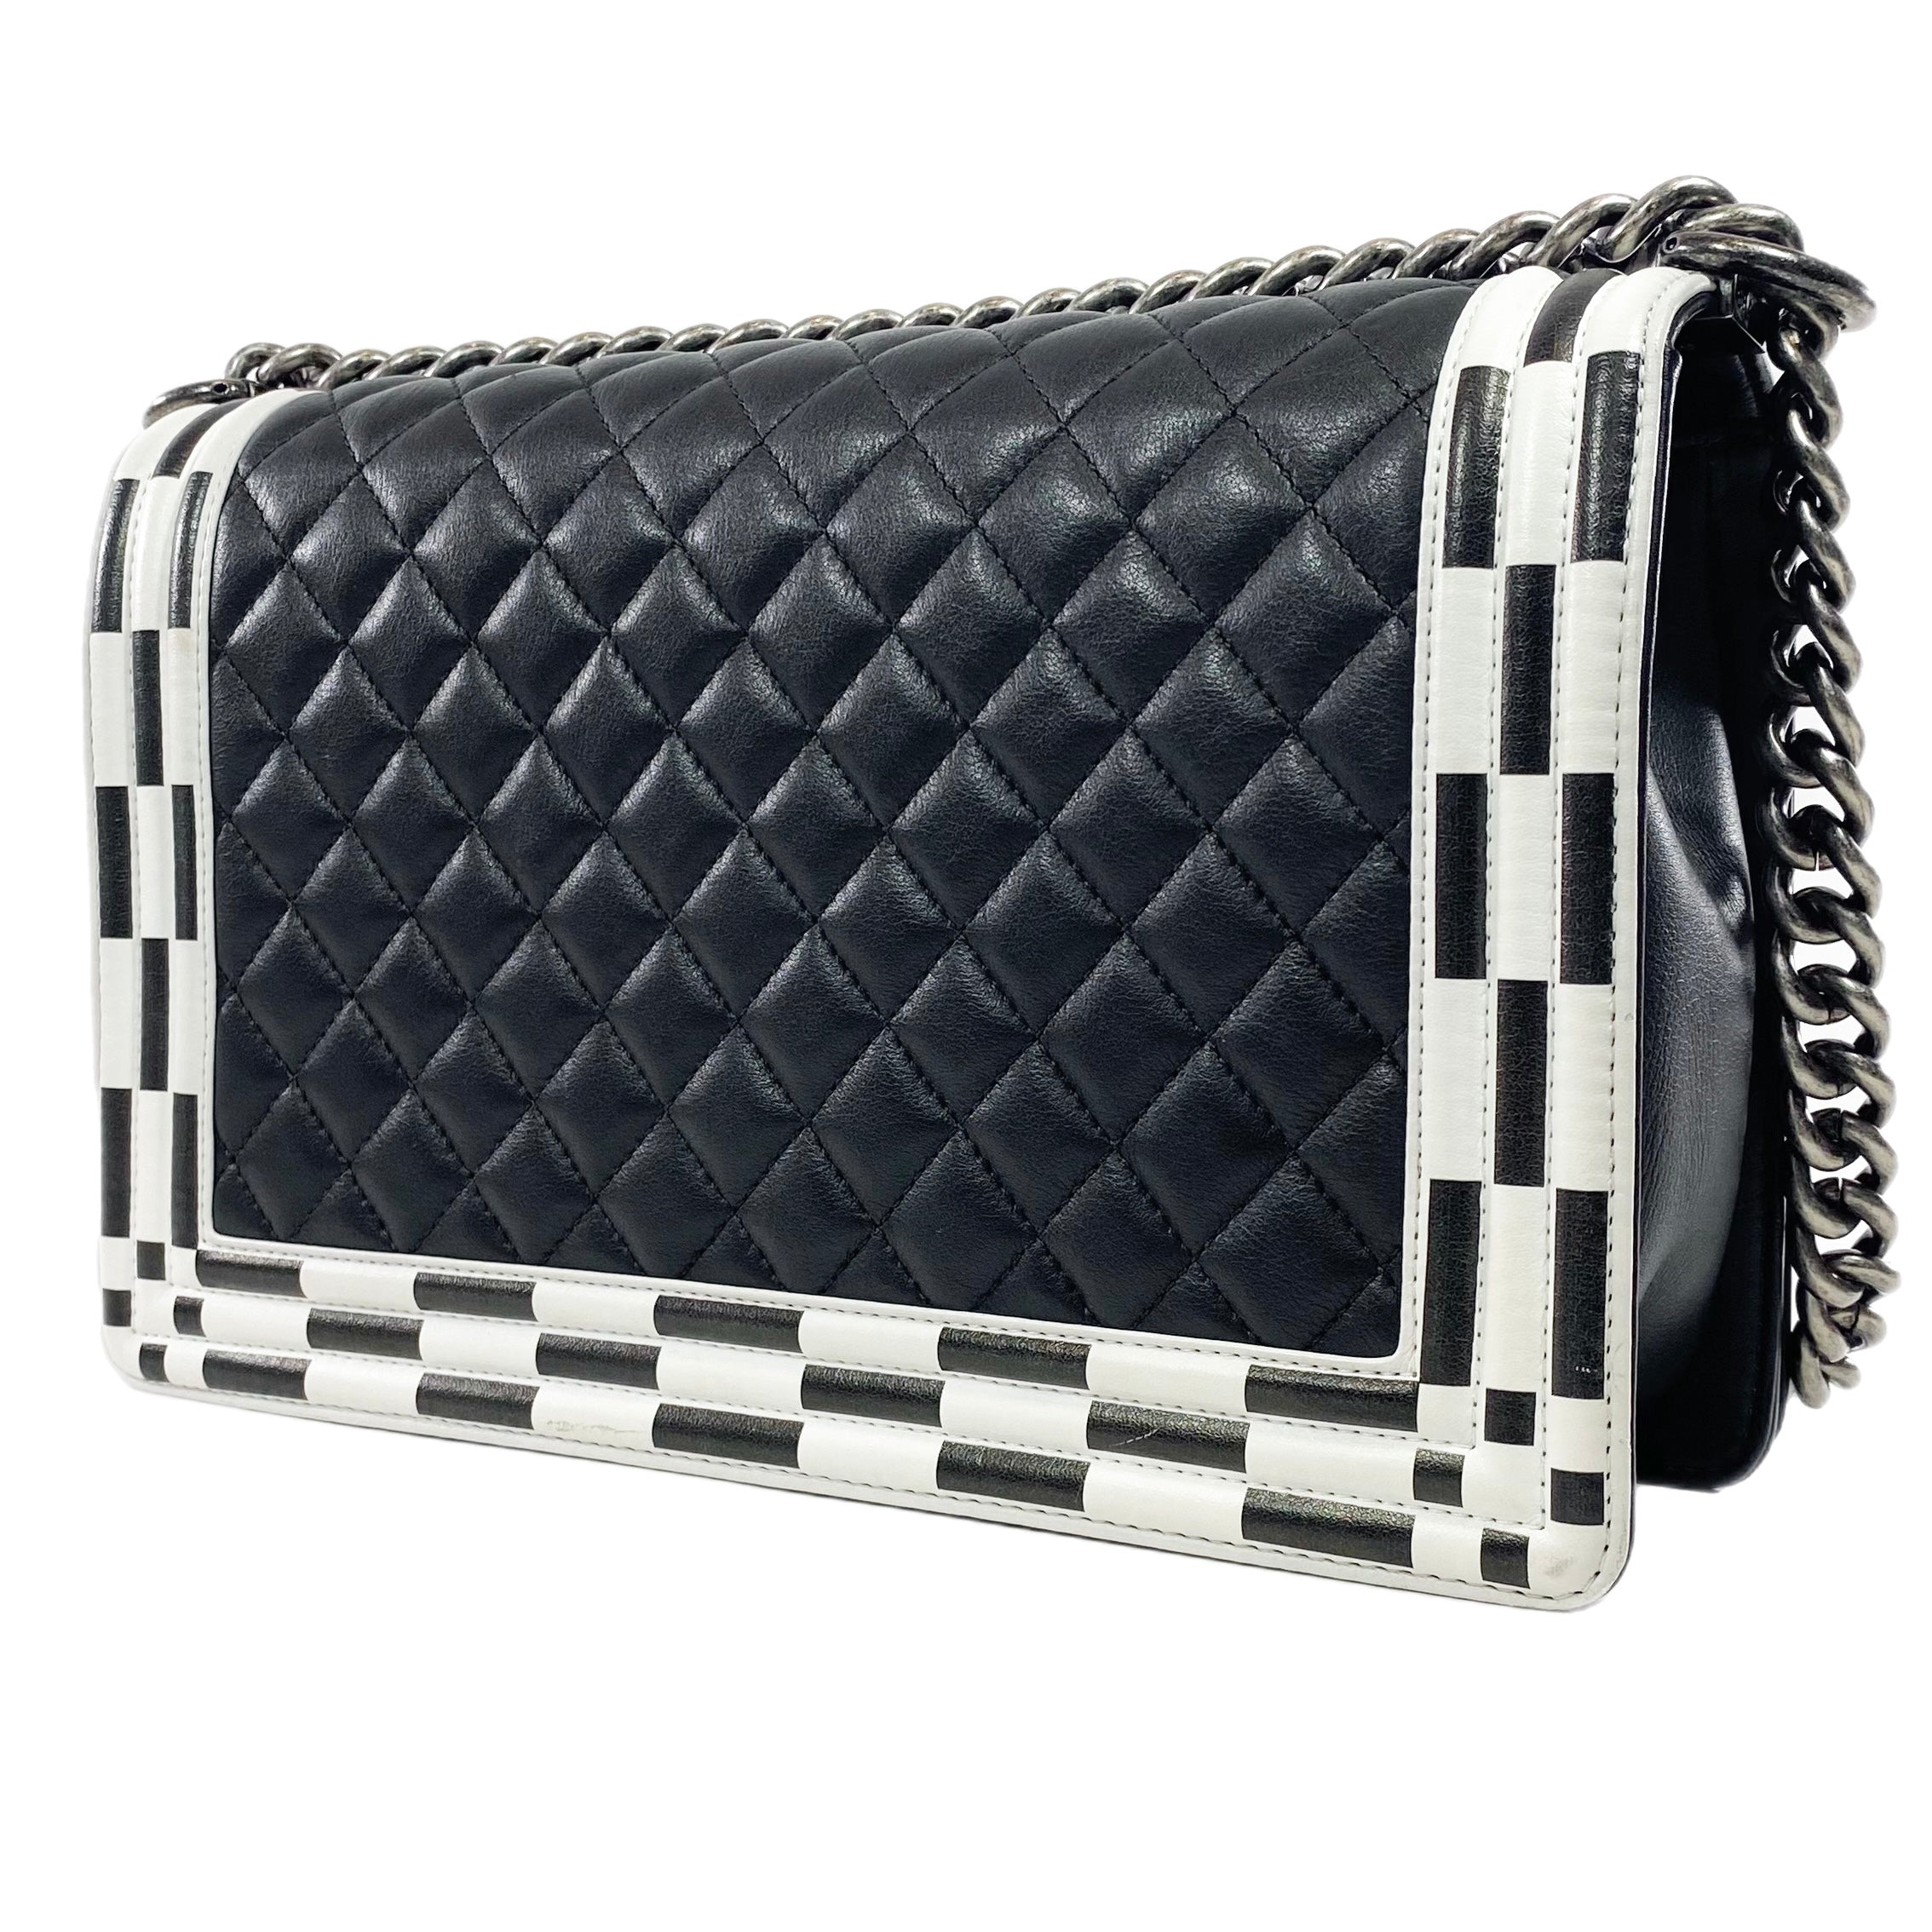 Chanel Black and White Quilted Calfskin New Medium Checkerboard Boy Flap Bag